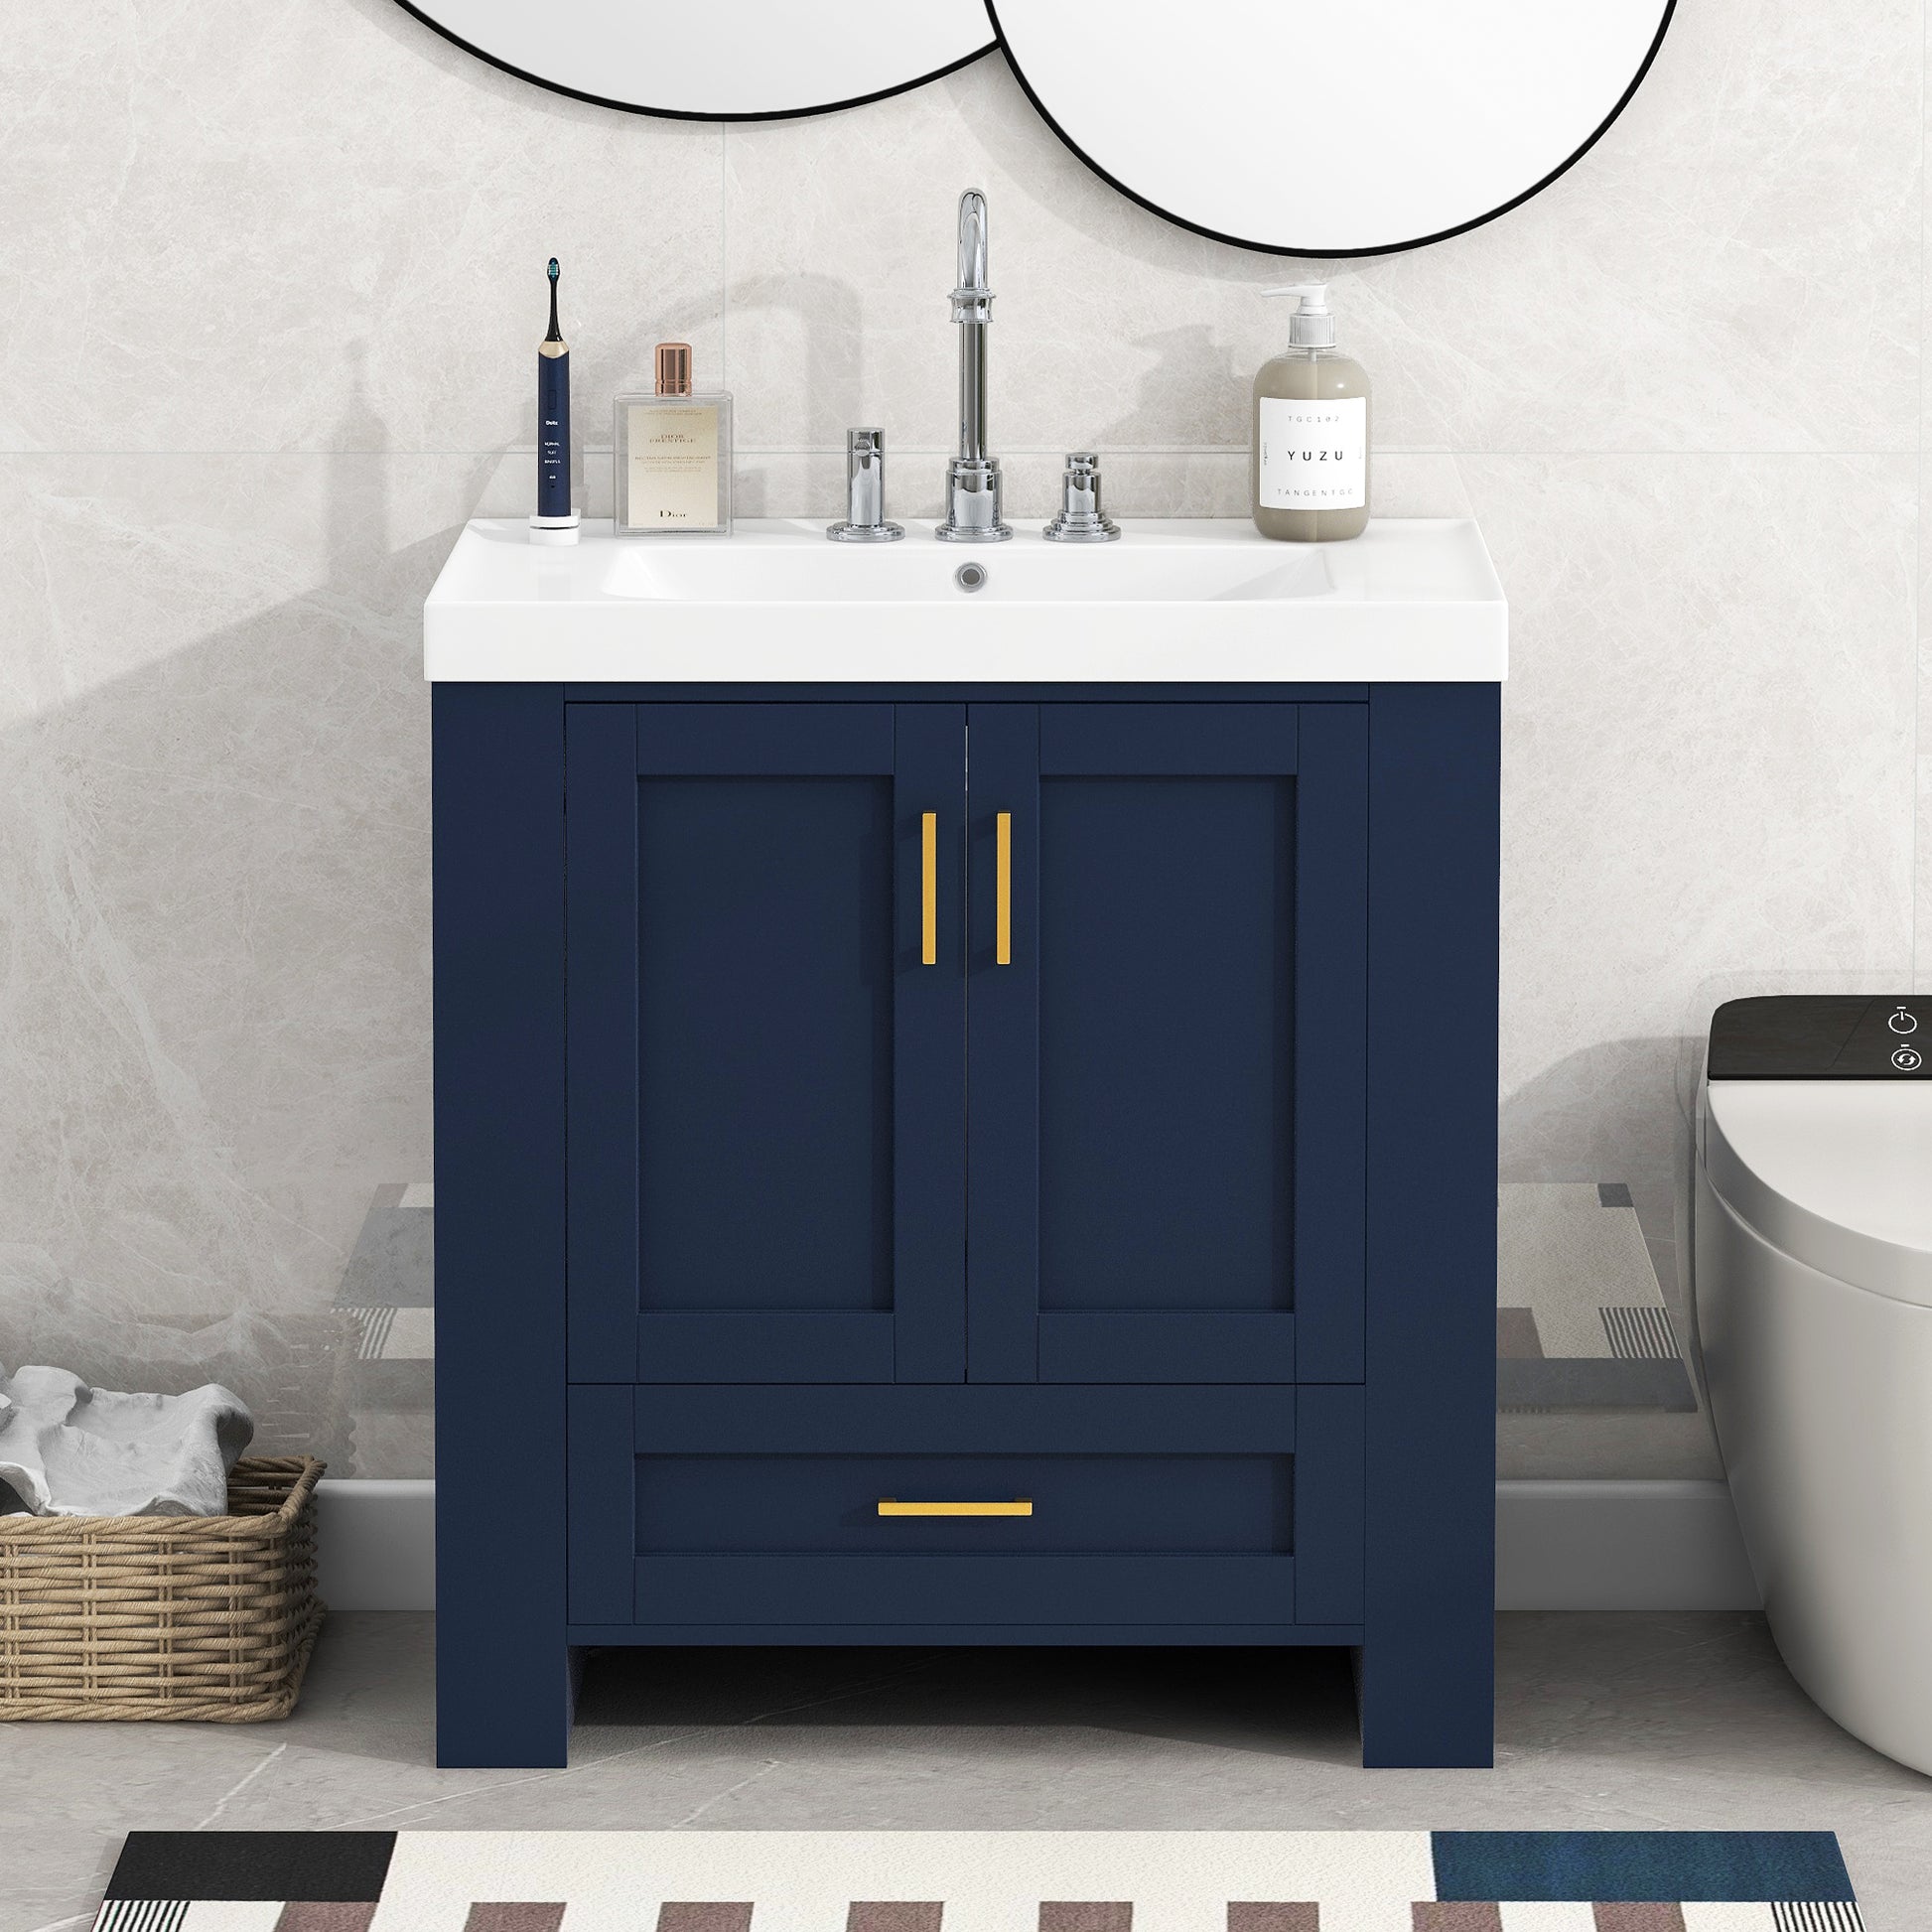 30'' Bathroom Vanity with Seperate Basin Sink, Modern 1-blue-2-3-24 to 31 in-soft close